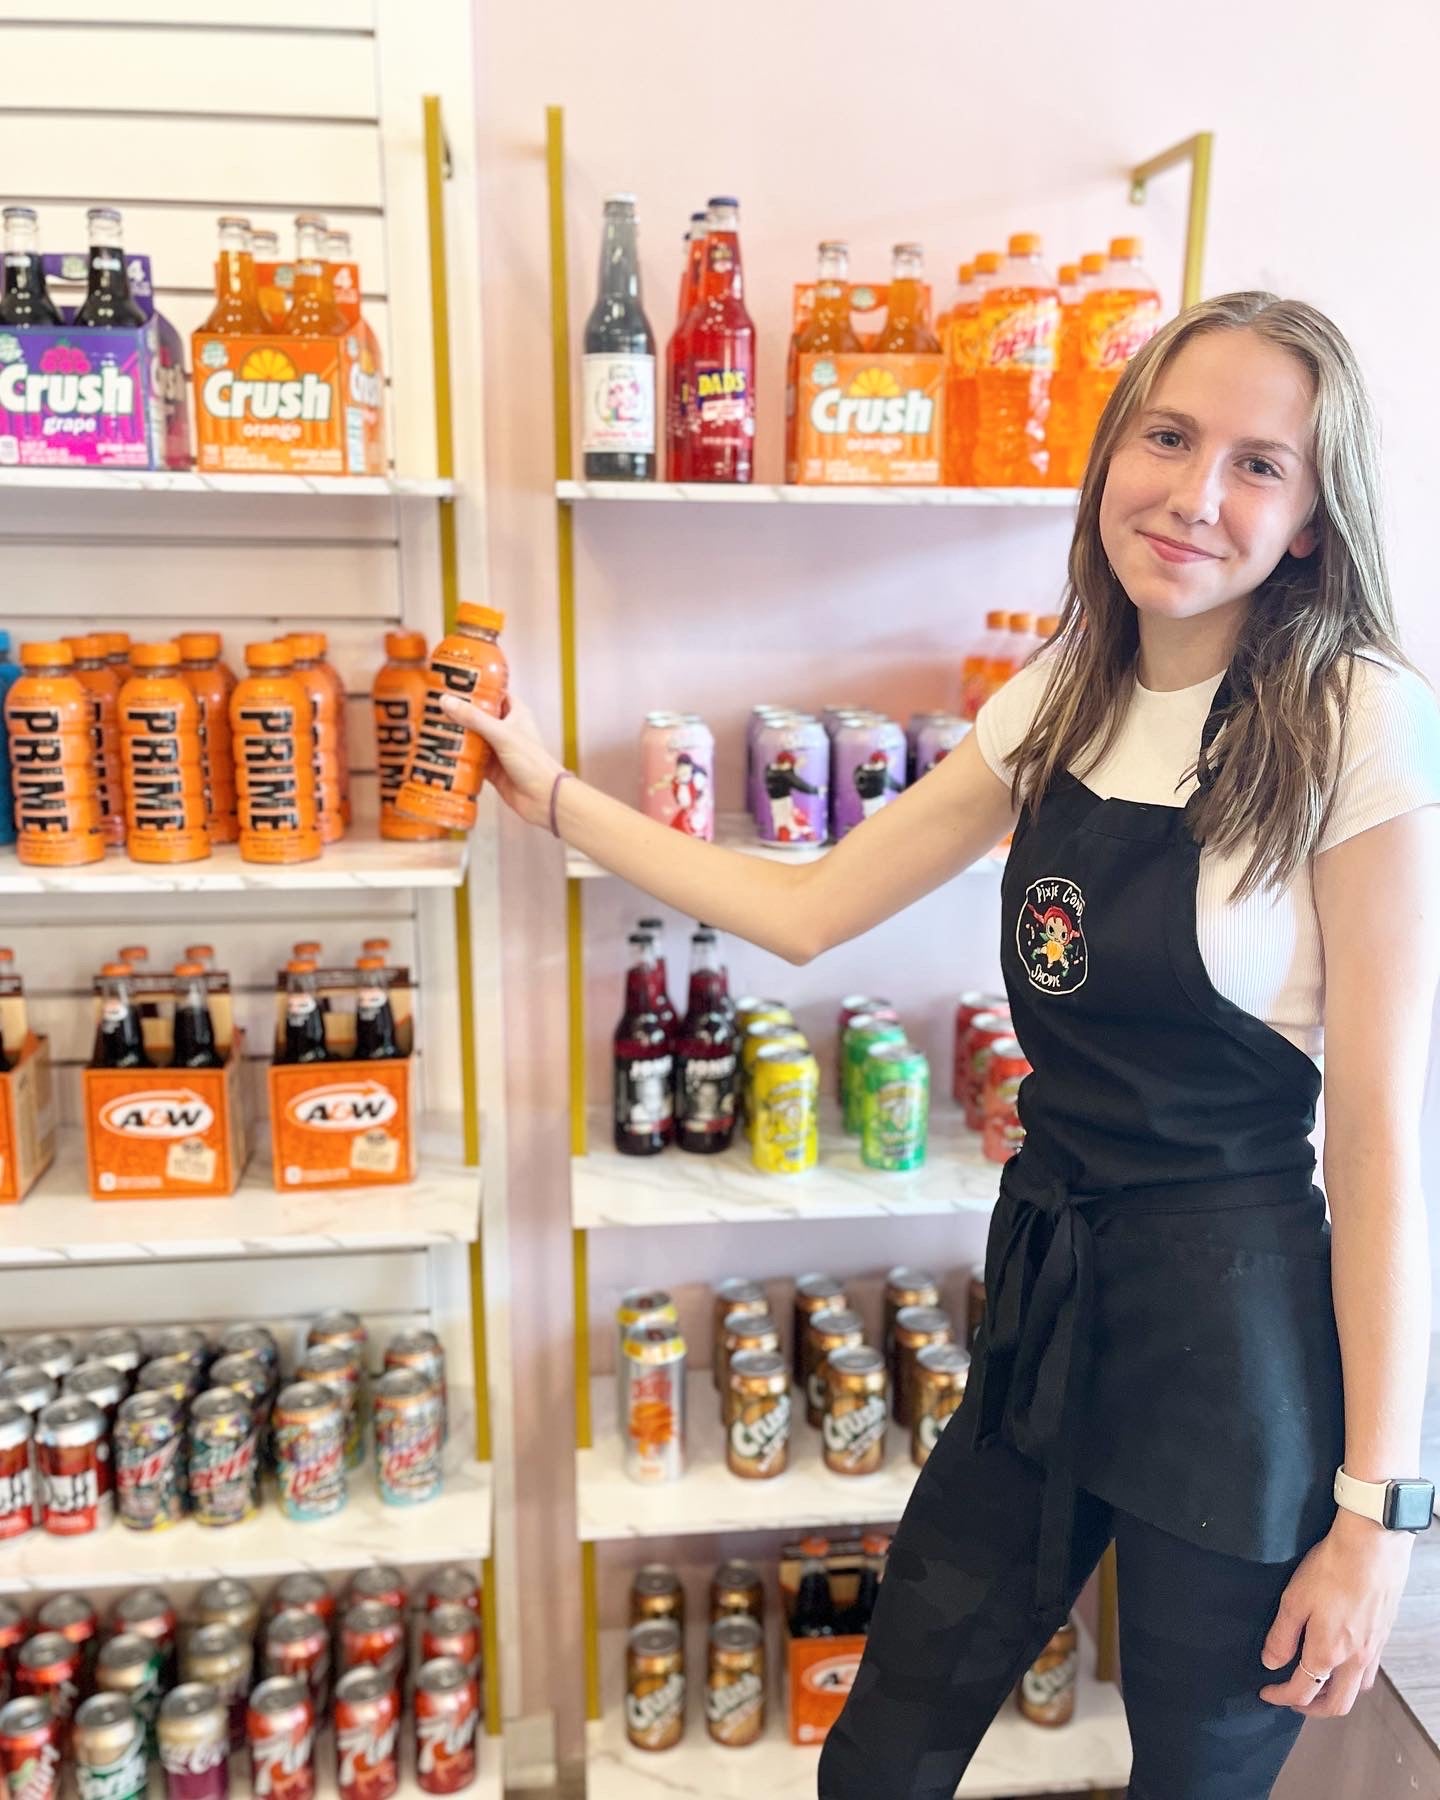 A smiling young woman stocking a shelving unit of beverages with orange prime hydration.